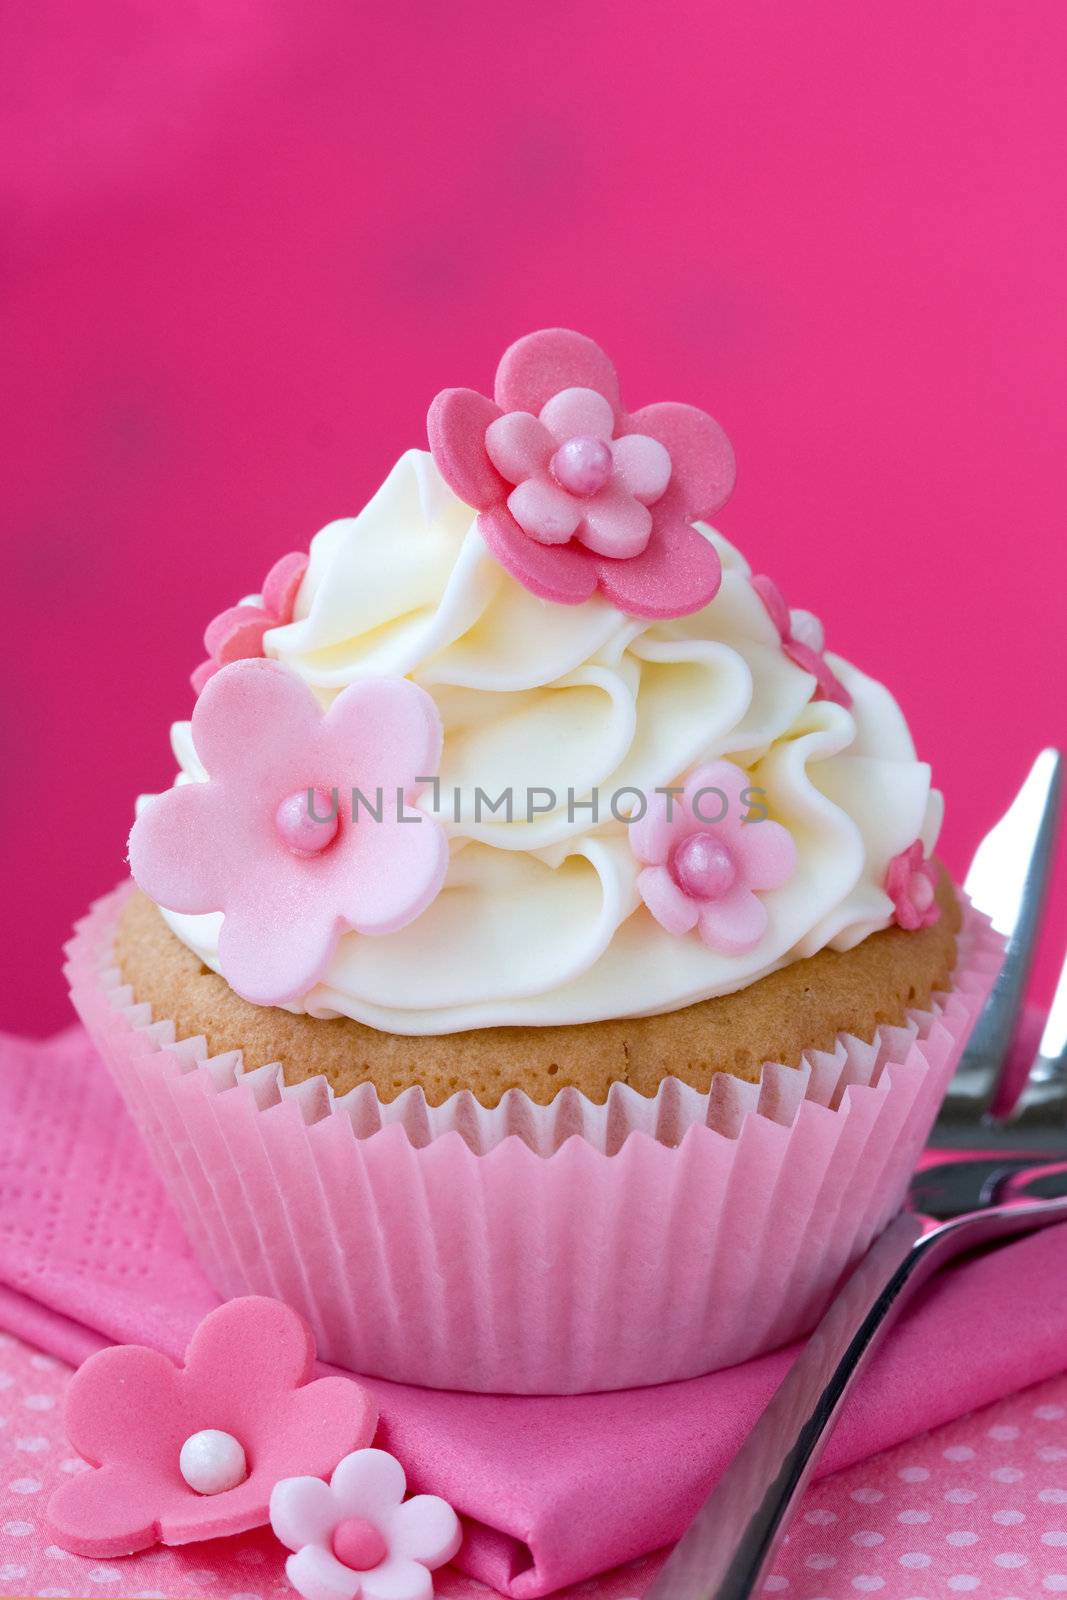 Cupcake decorated with pink fondant flowers